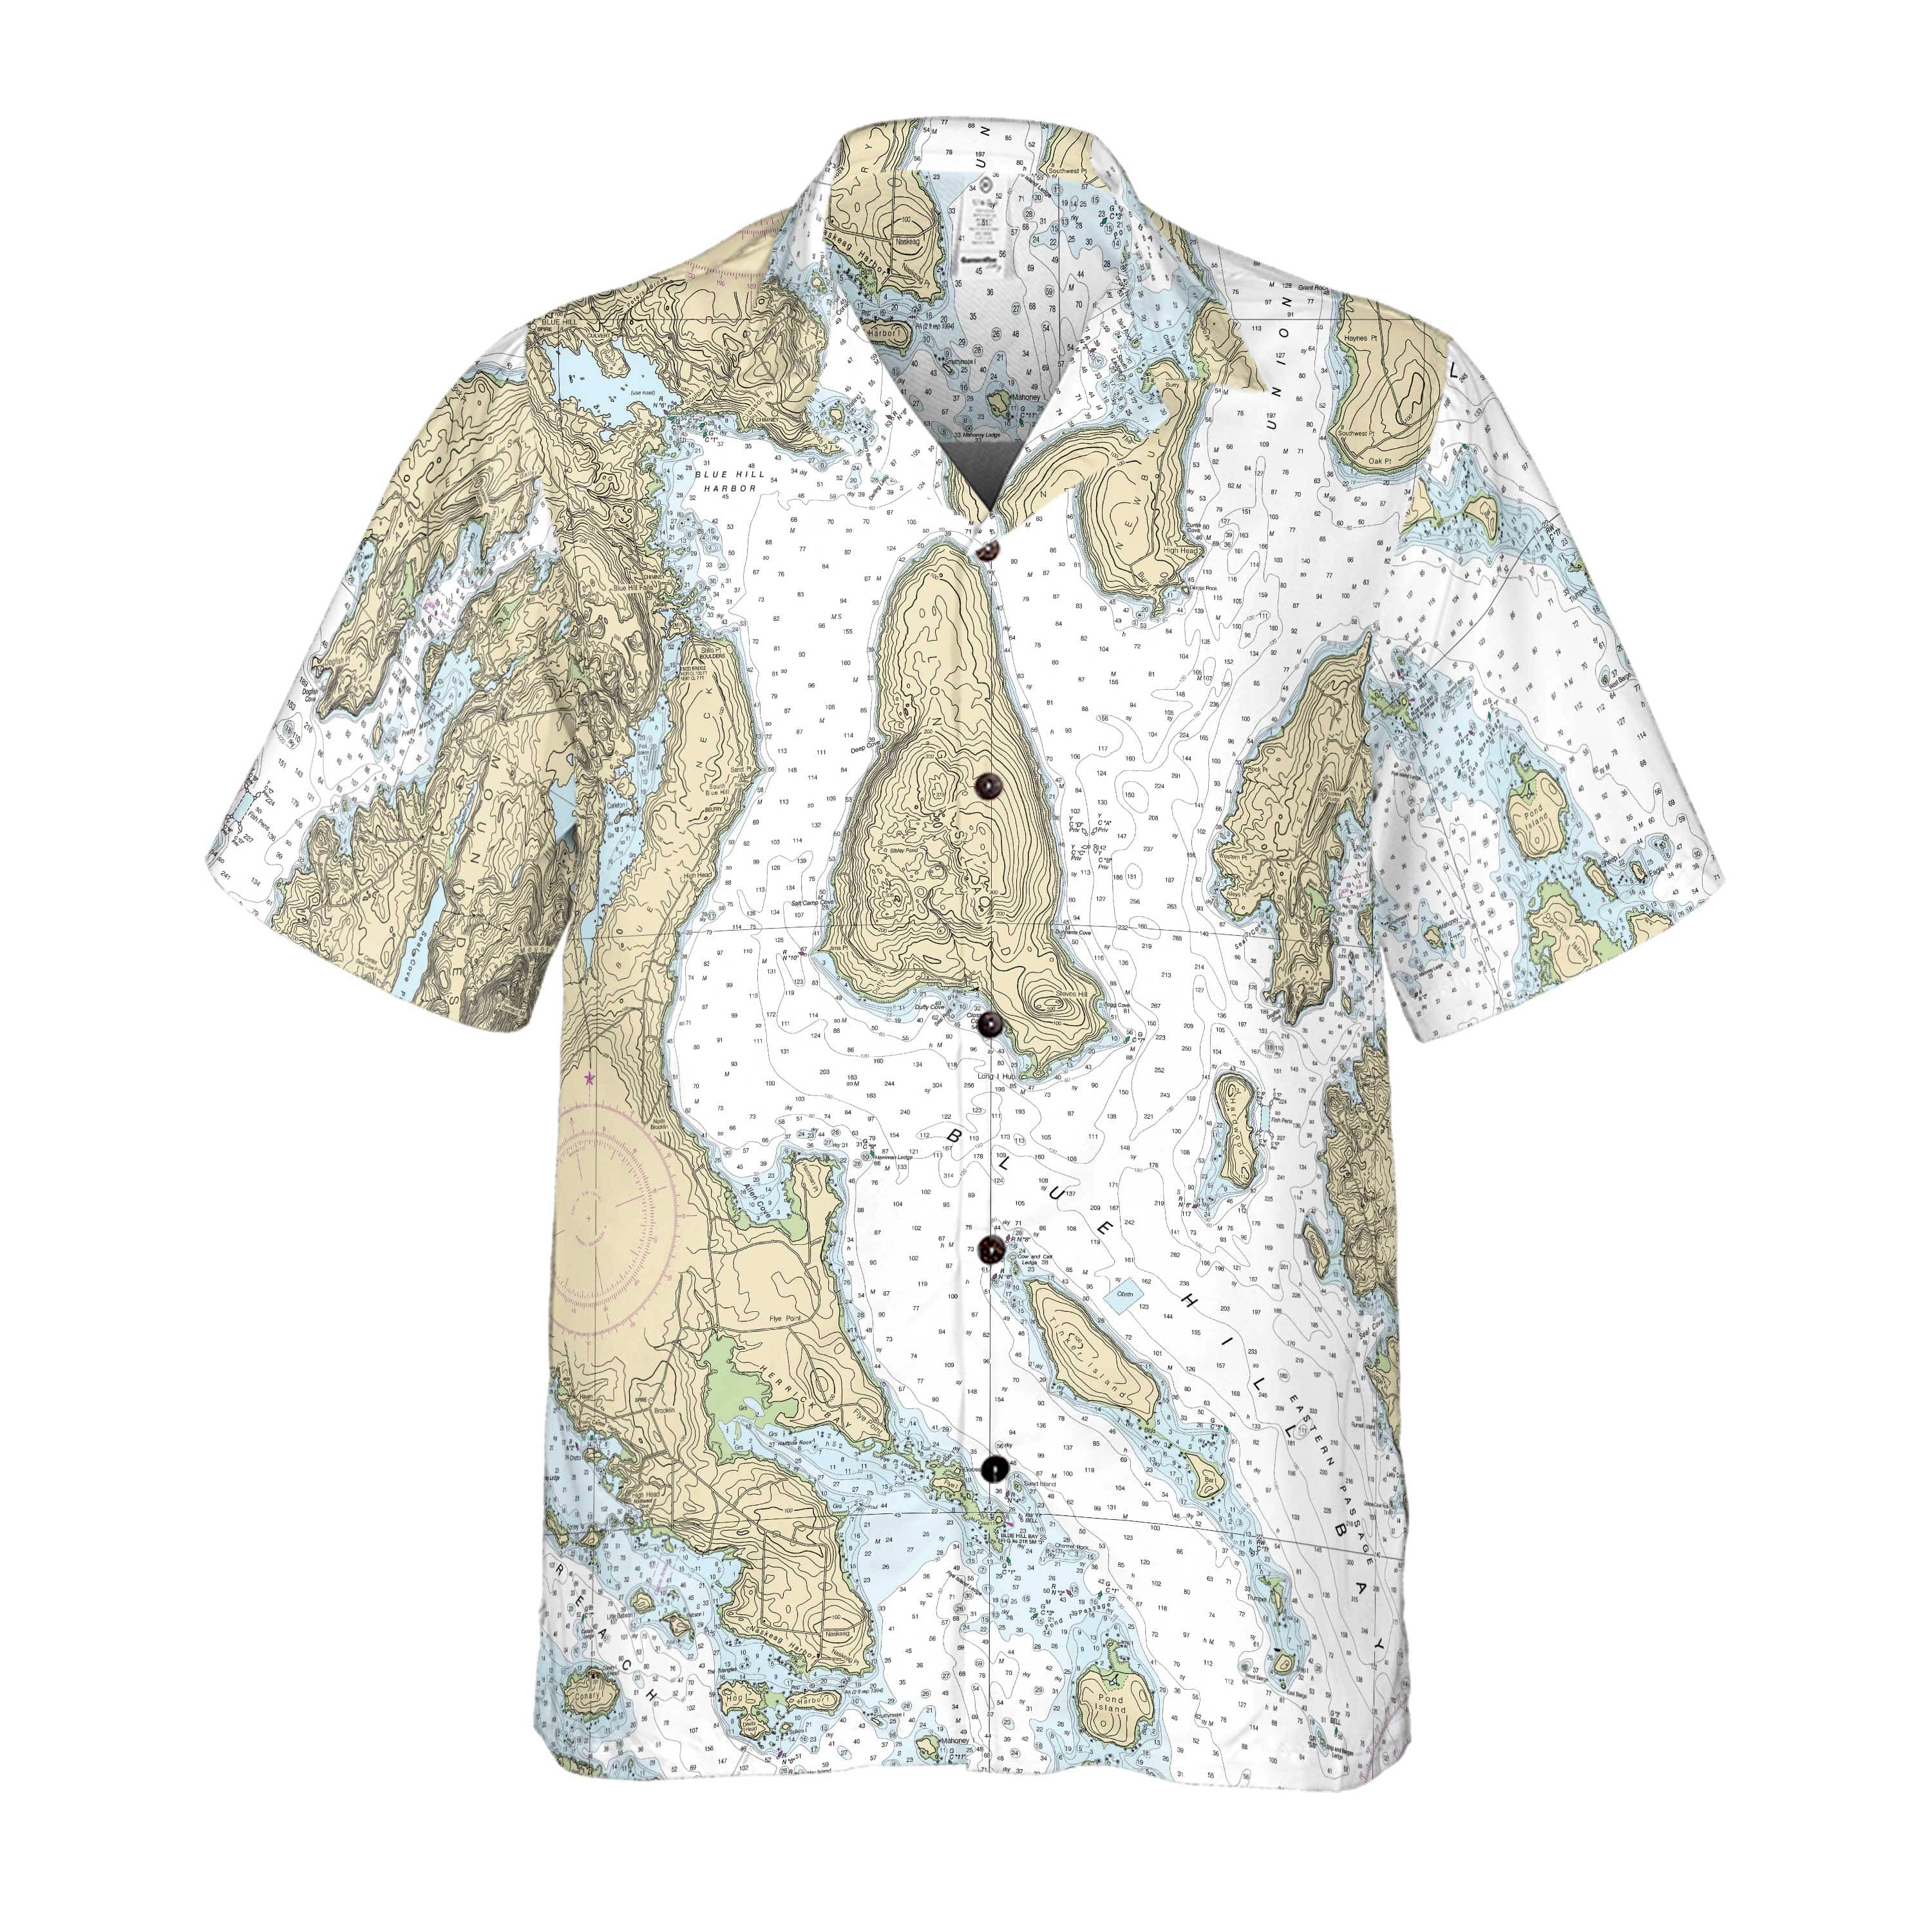 The Blue Hill Bay Coconut Button Camp Shirt